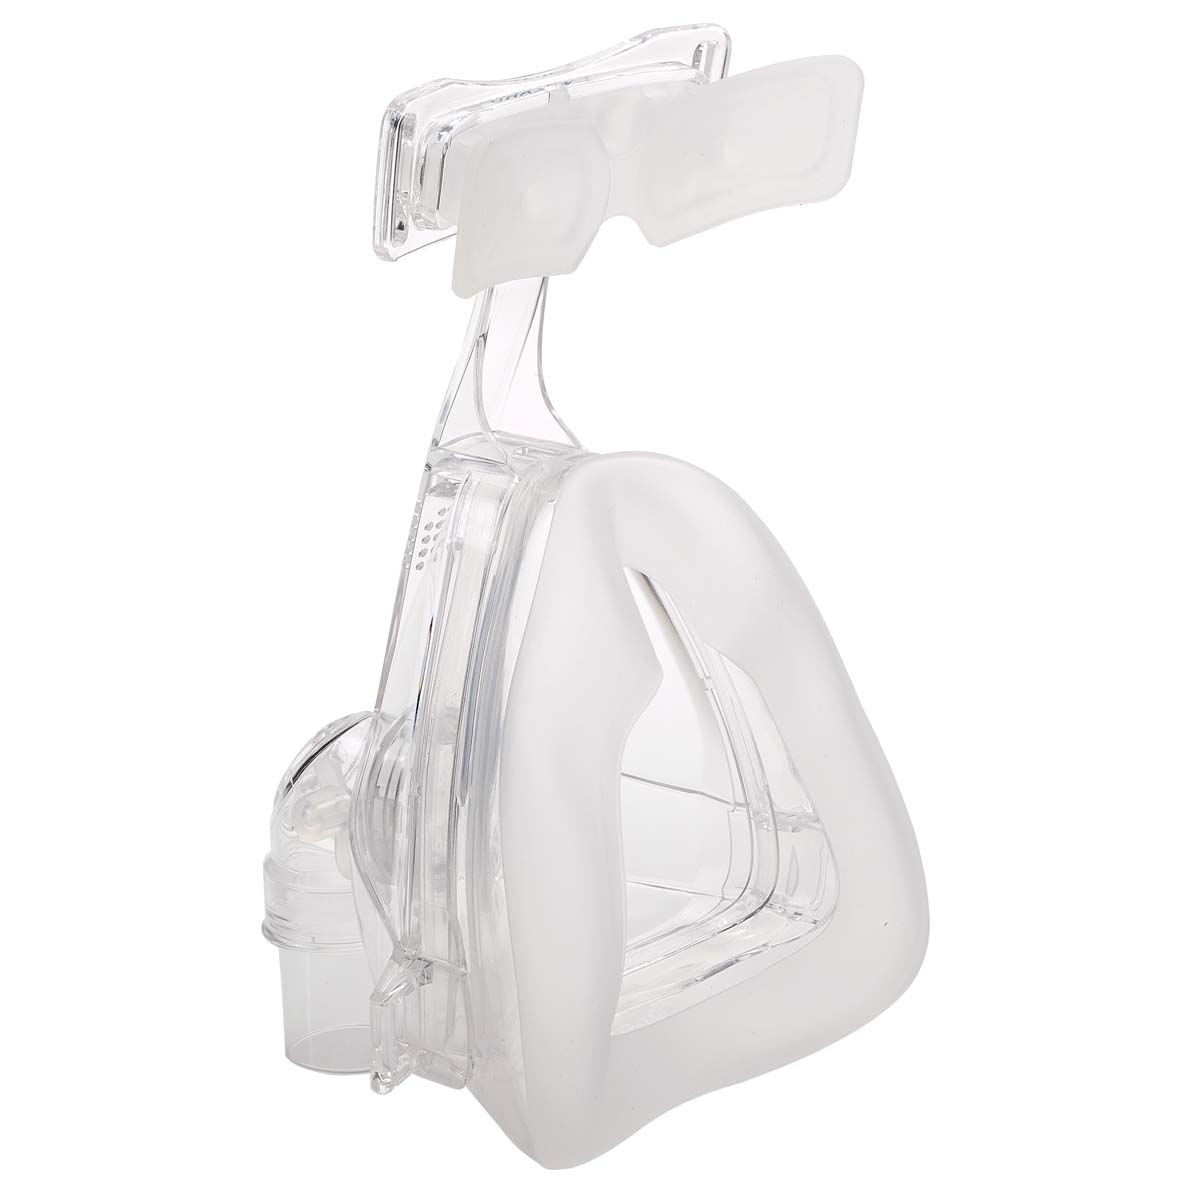 Sunset CPAP Full-Face Mask : # CM005S Sunset Deluxe Full Face CPAP Mask with removable cushion and Headgear , Small-/catalog/full_face_mask/kego/wizard-03